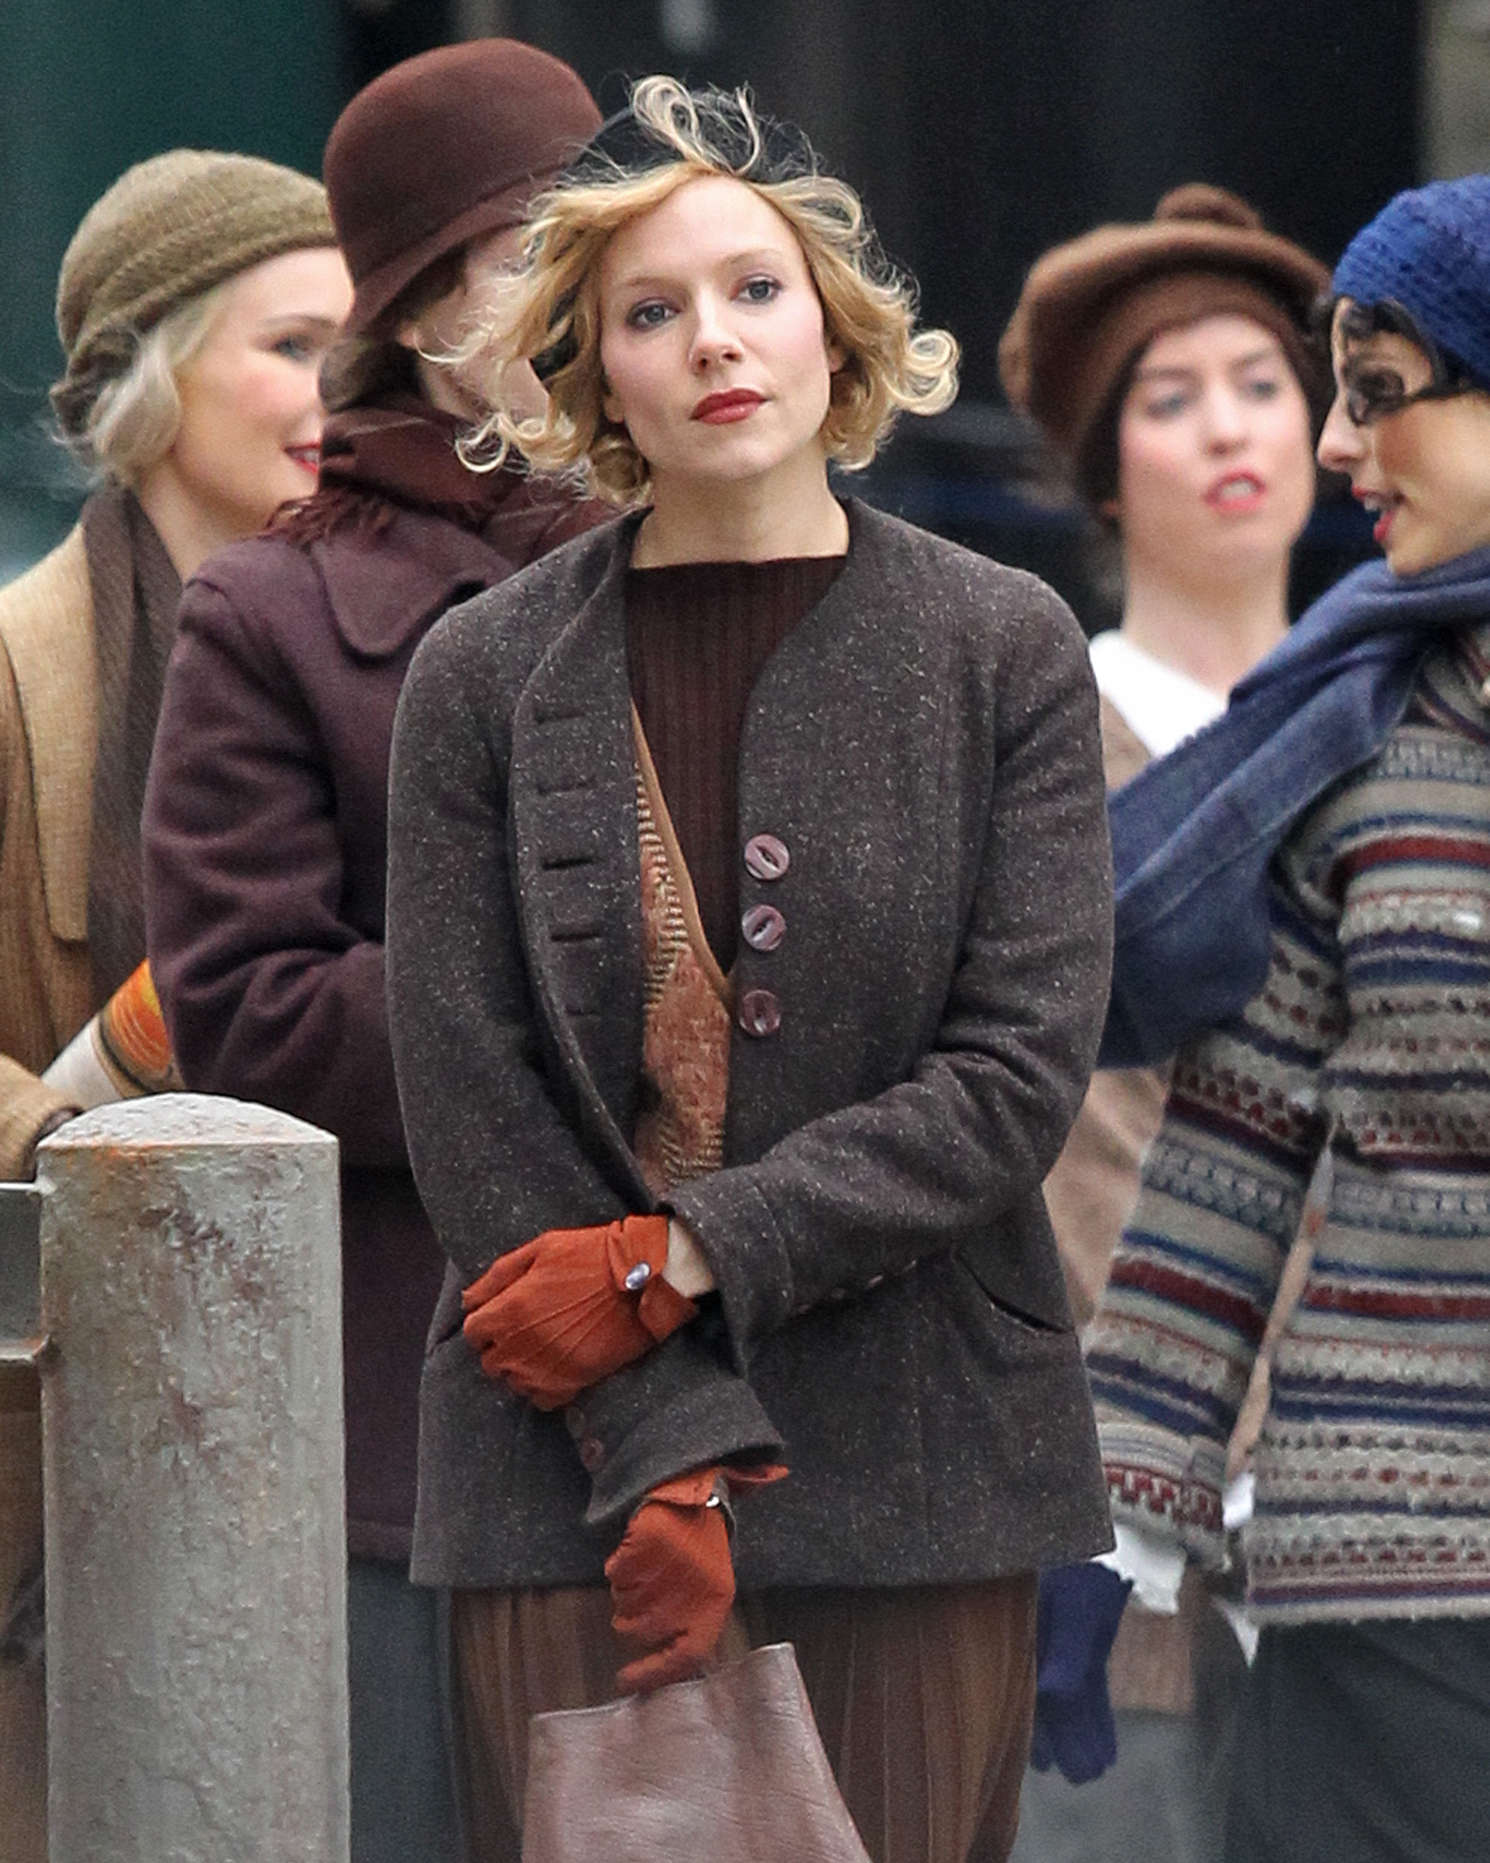 Sienna Miller on the set of 'Live By Night' in Boston